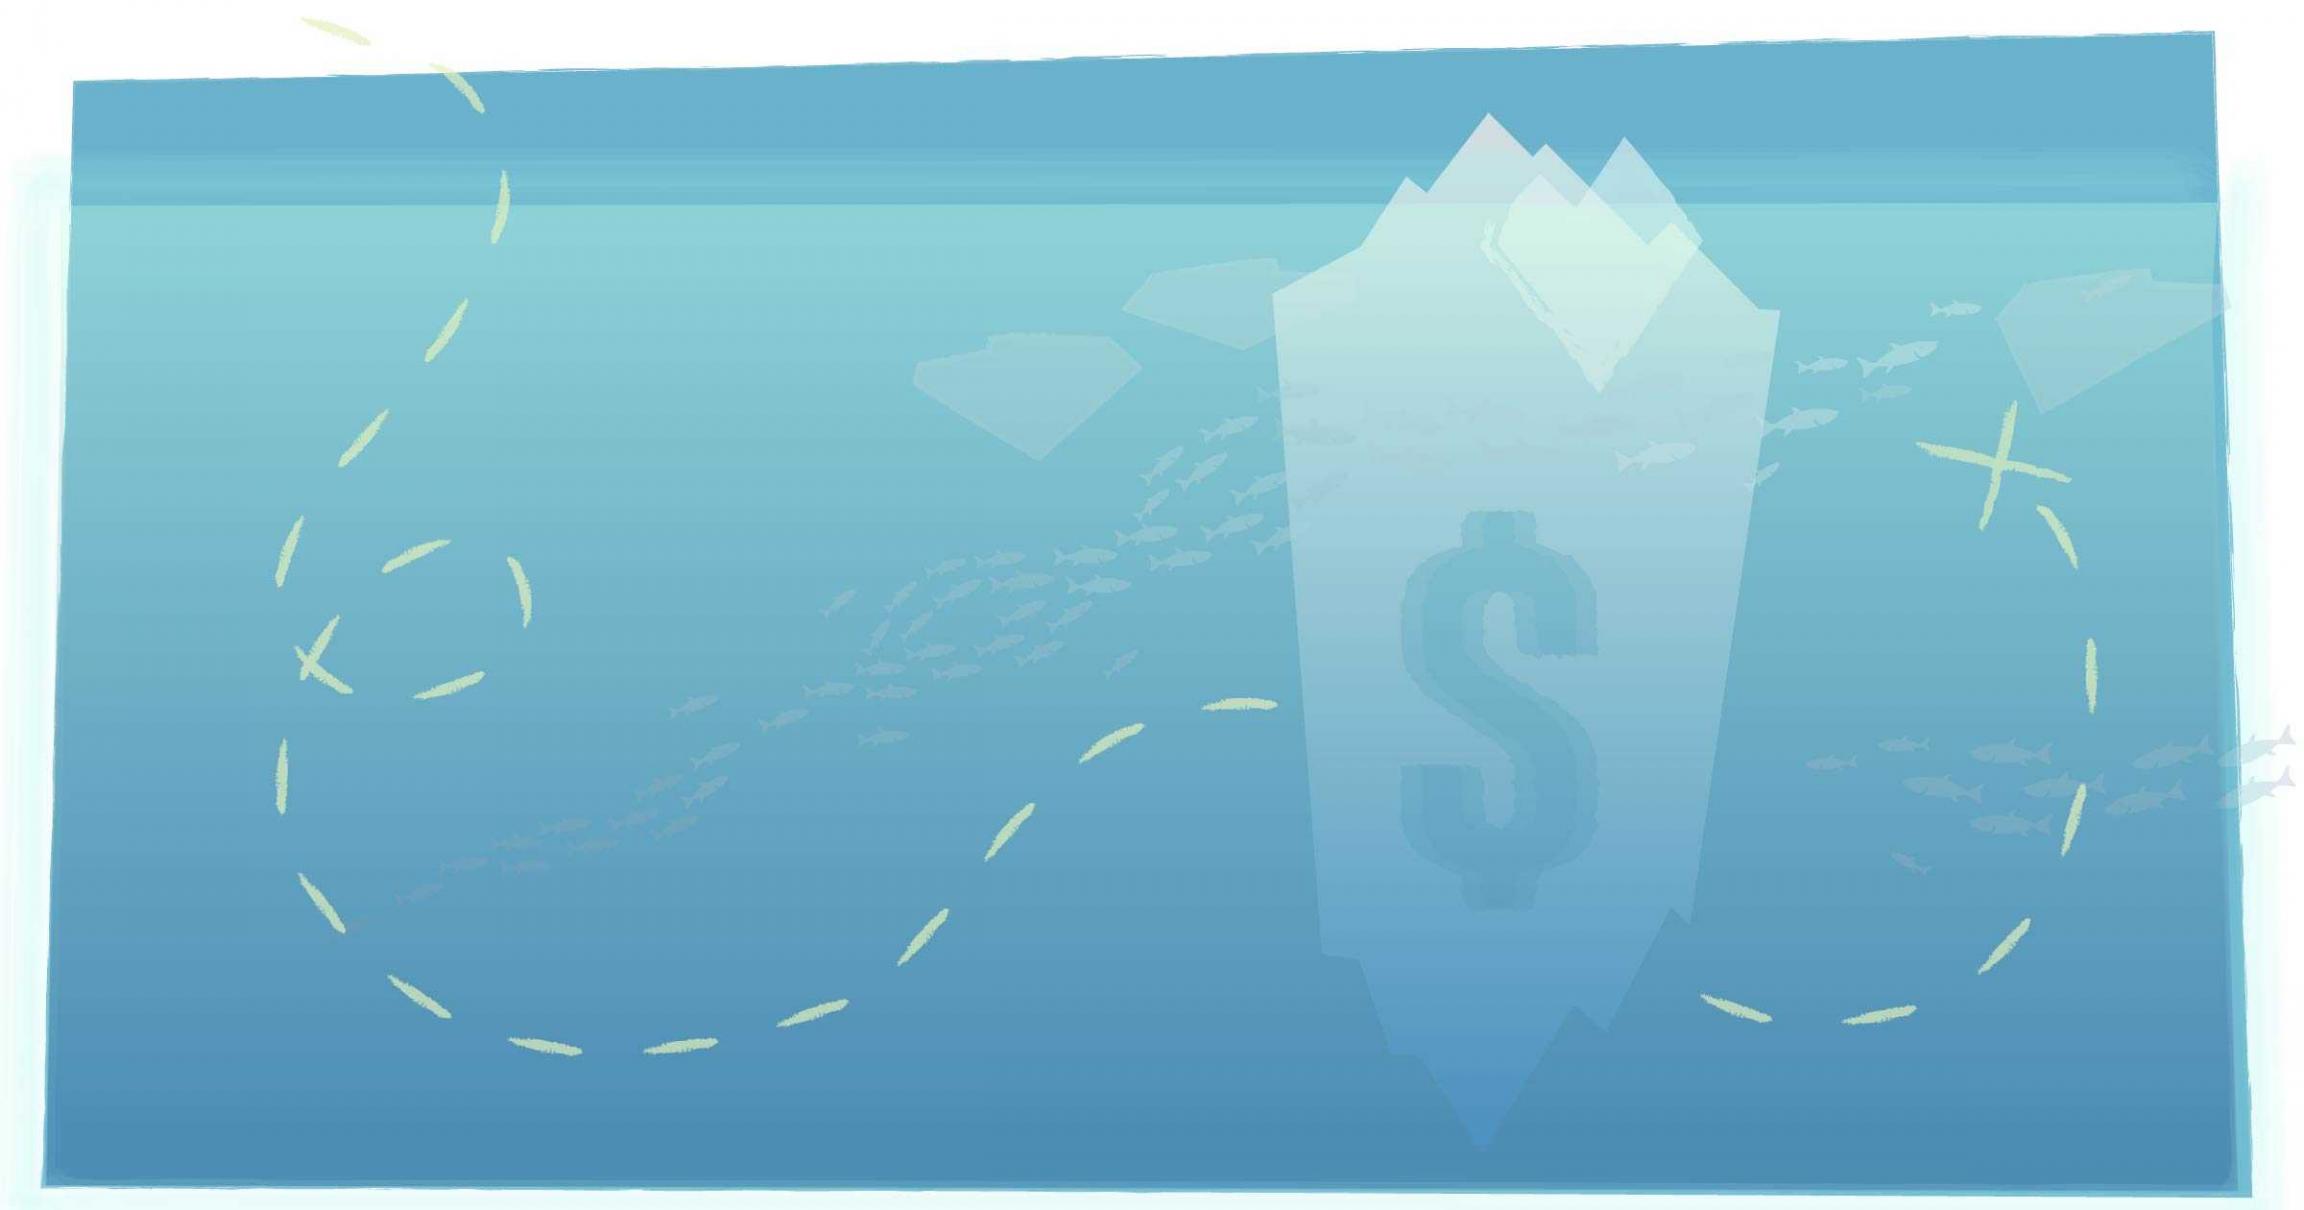 an iceberg with a dollar sign on it as seen underwater